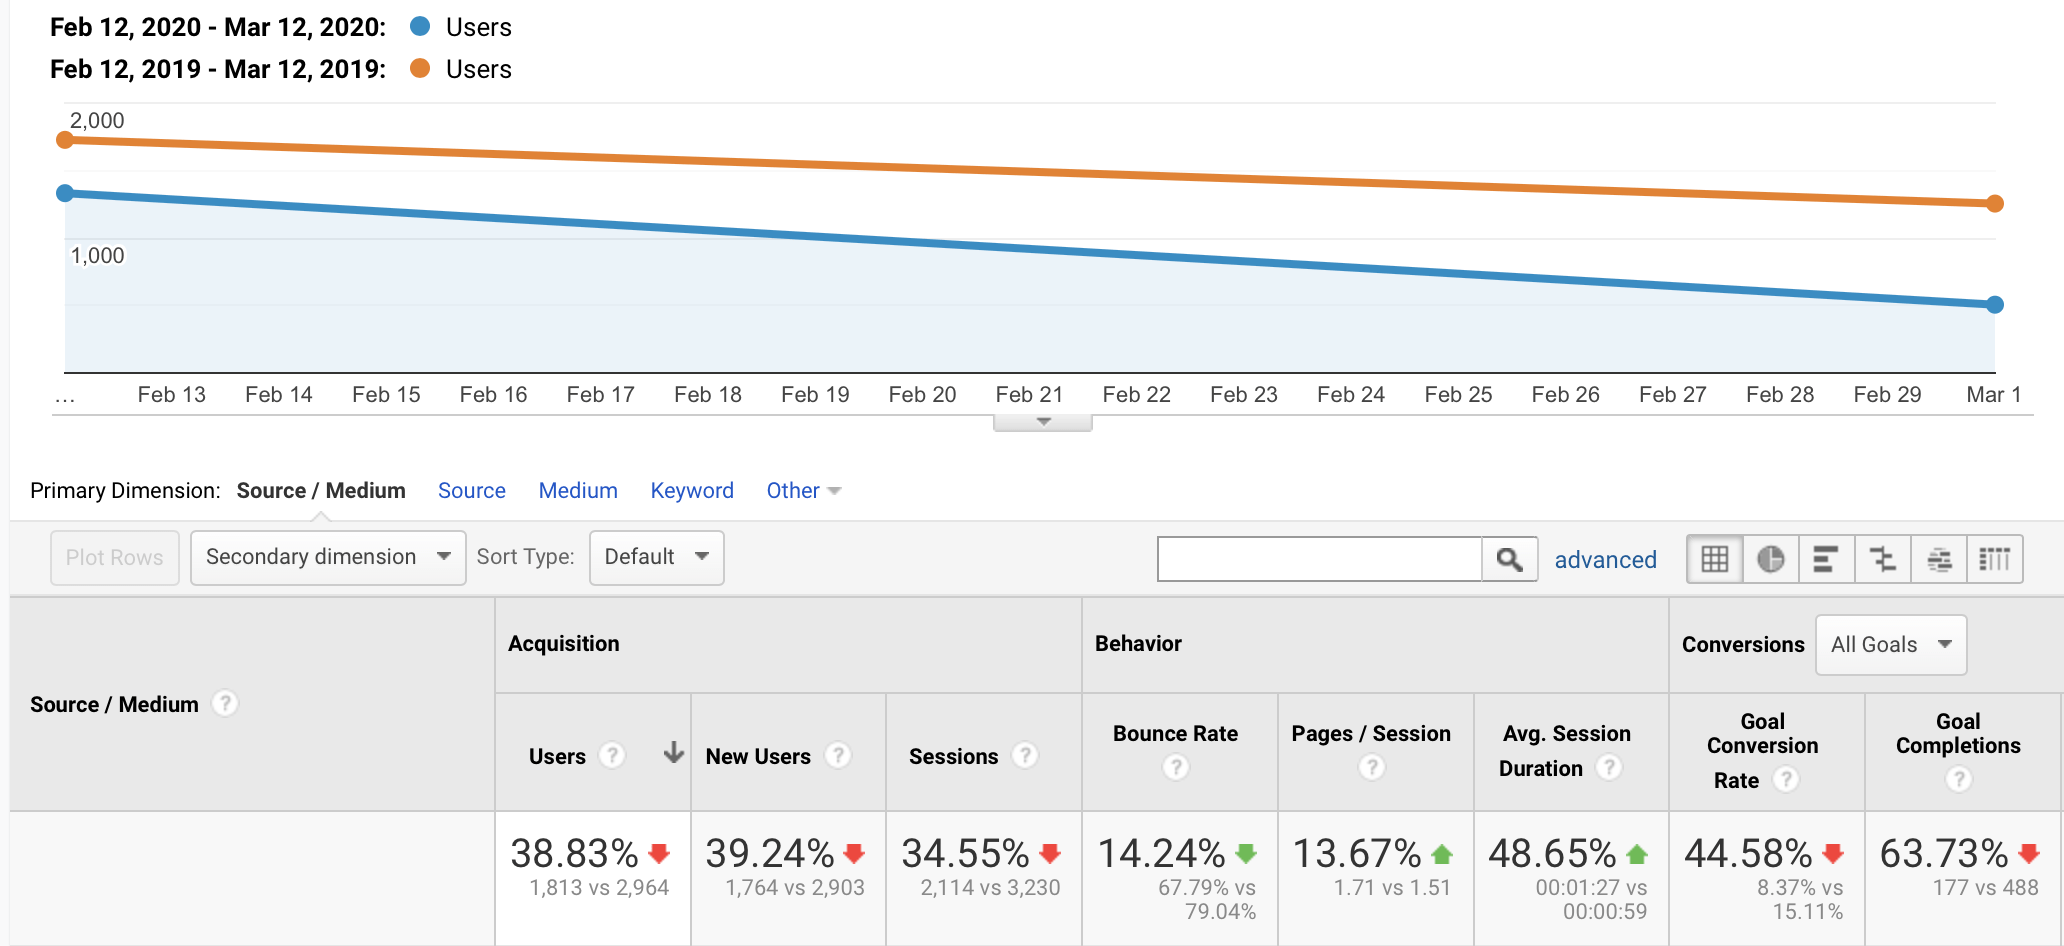 Sharp drop in users due to poor SEO